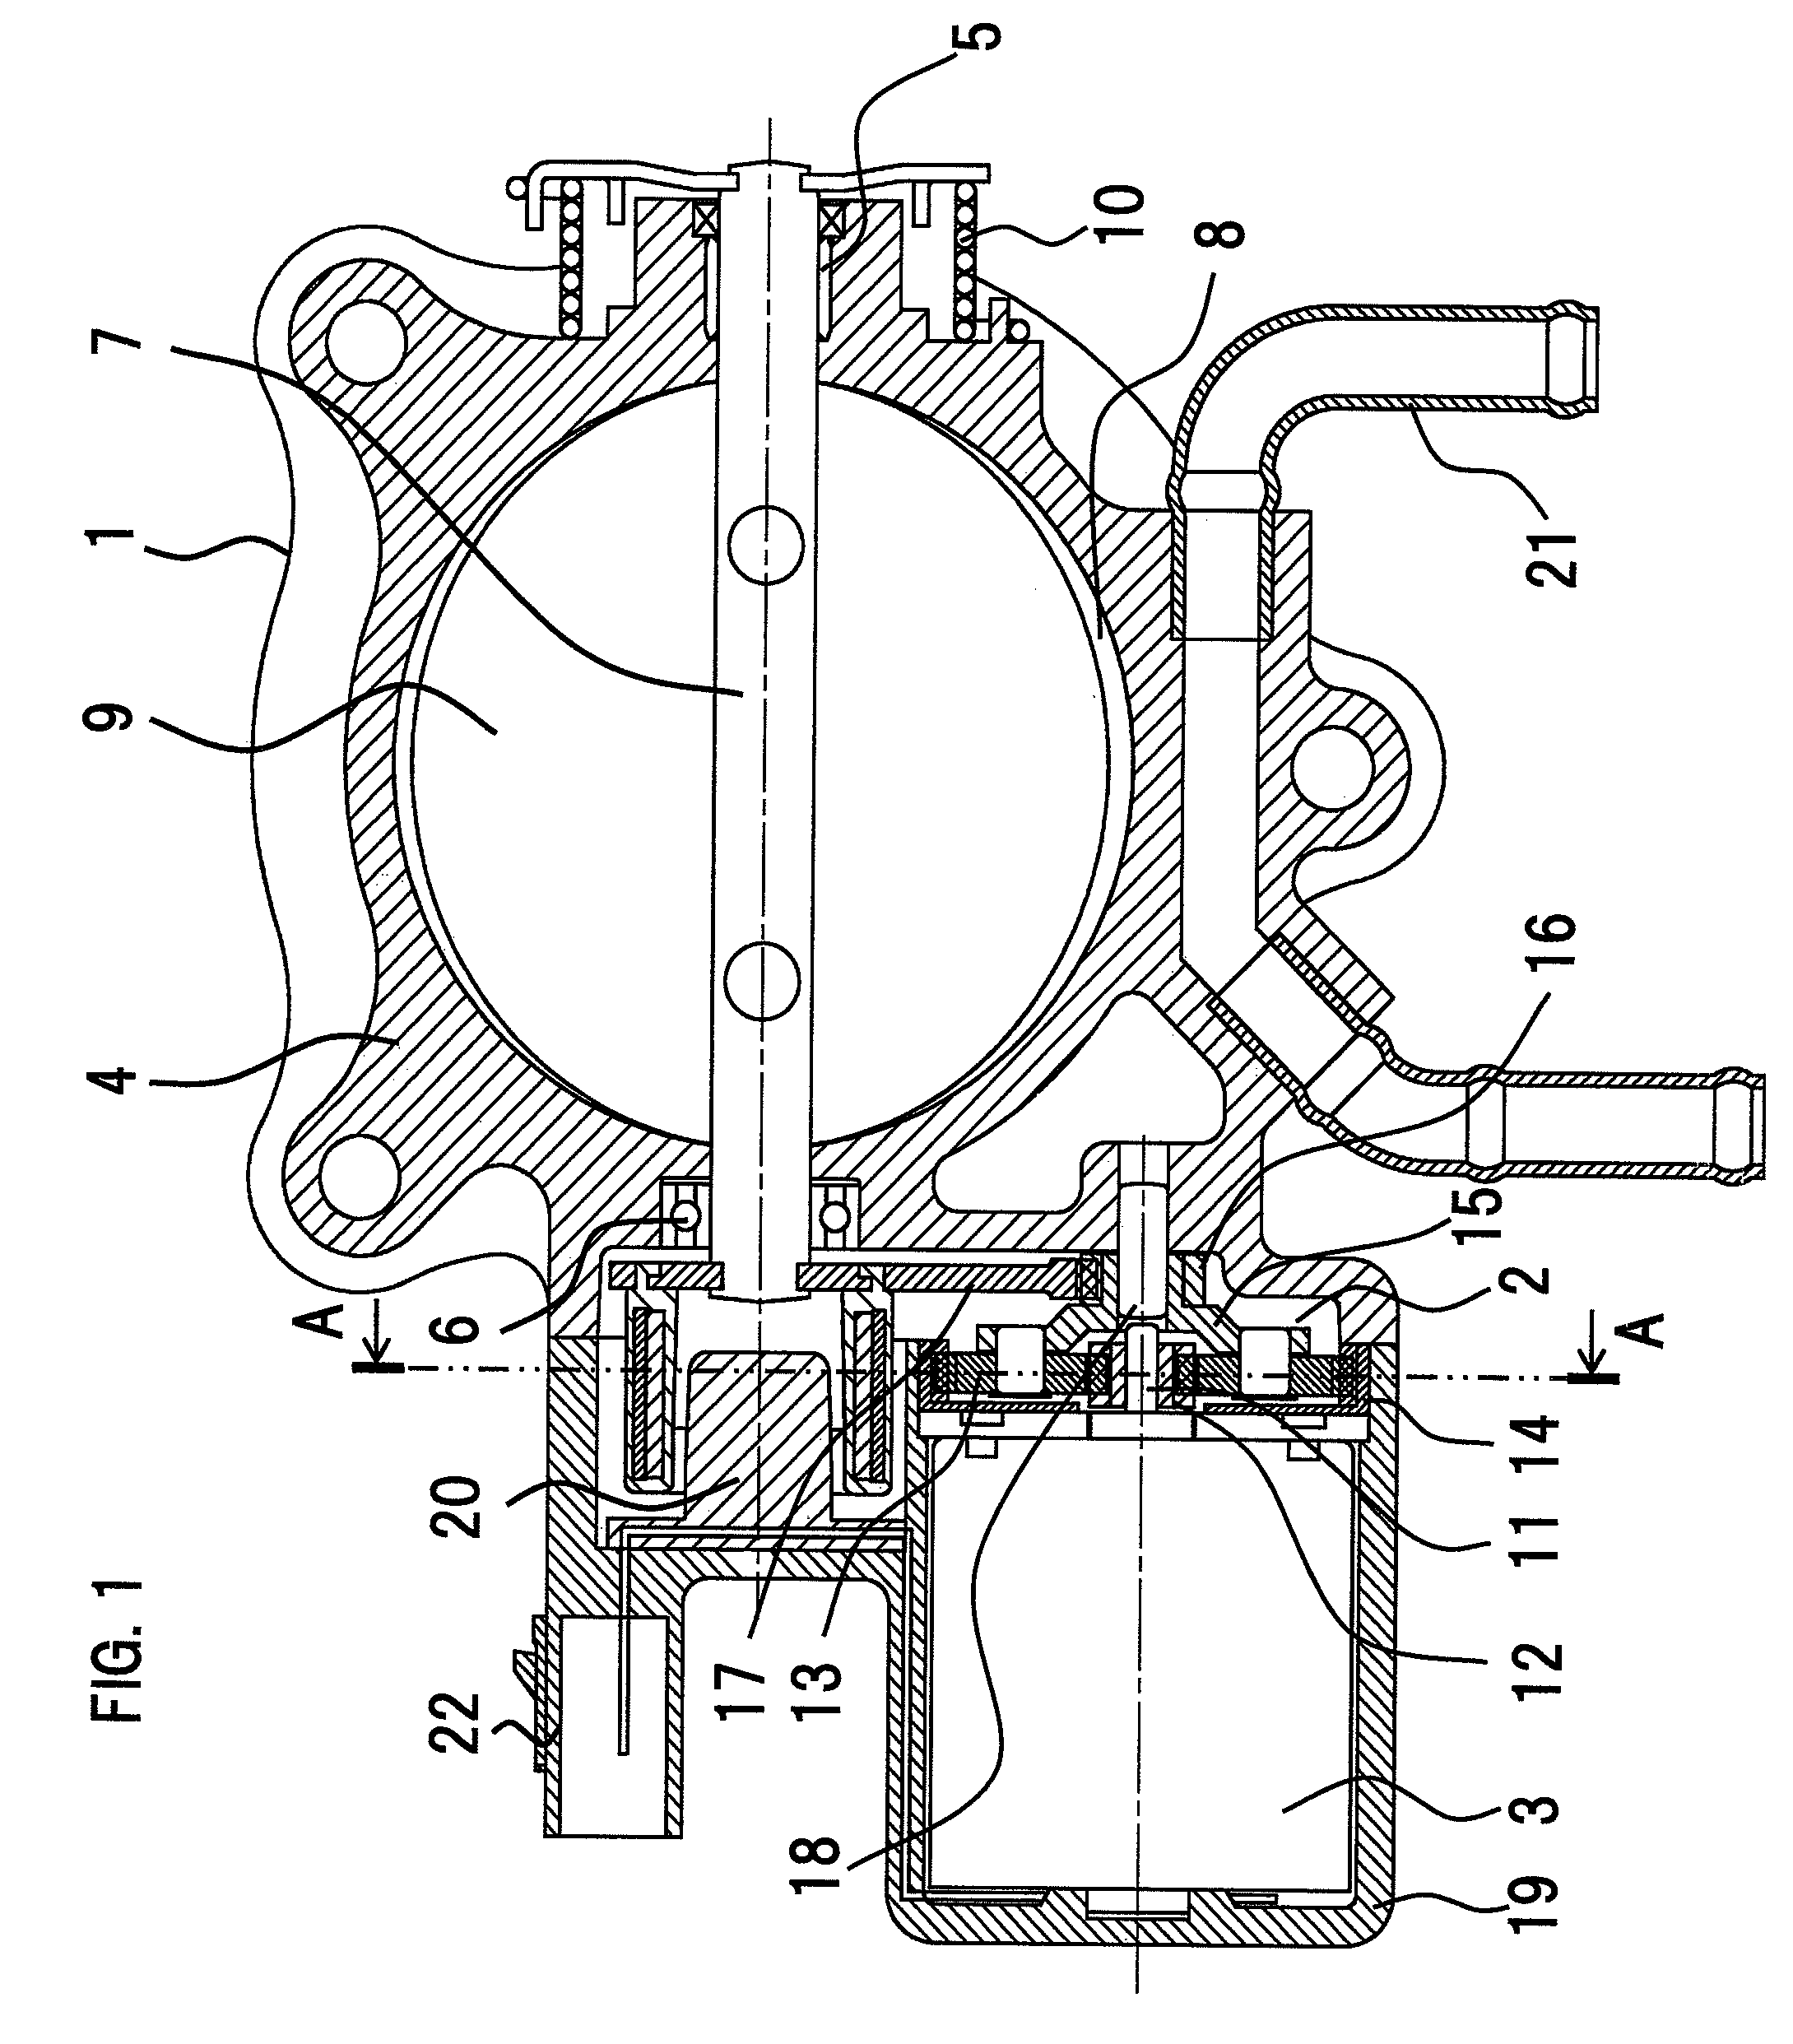 Electronically-controlled throttle body